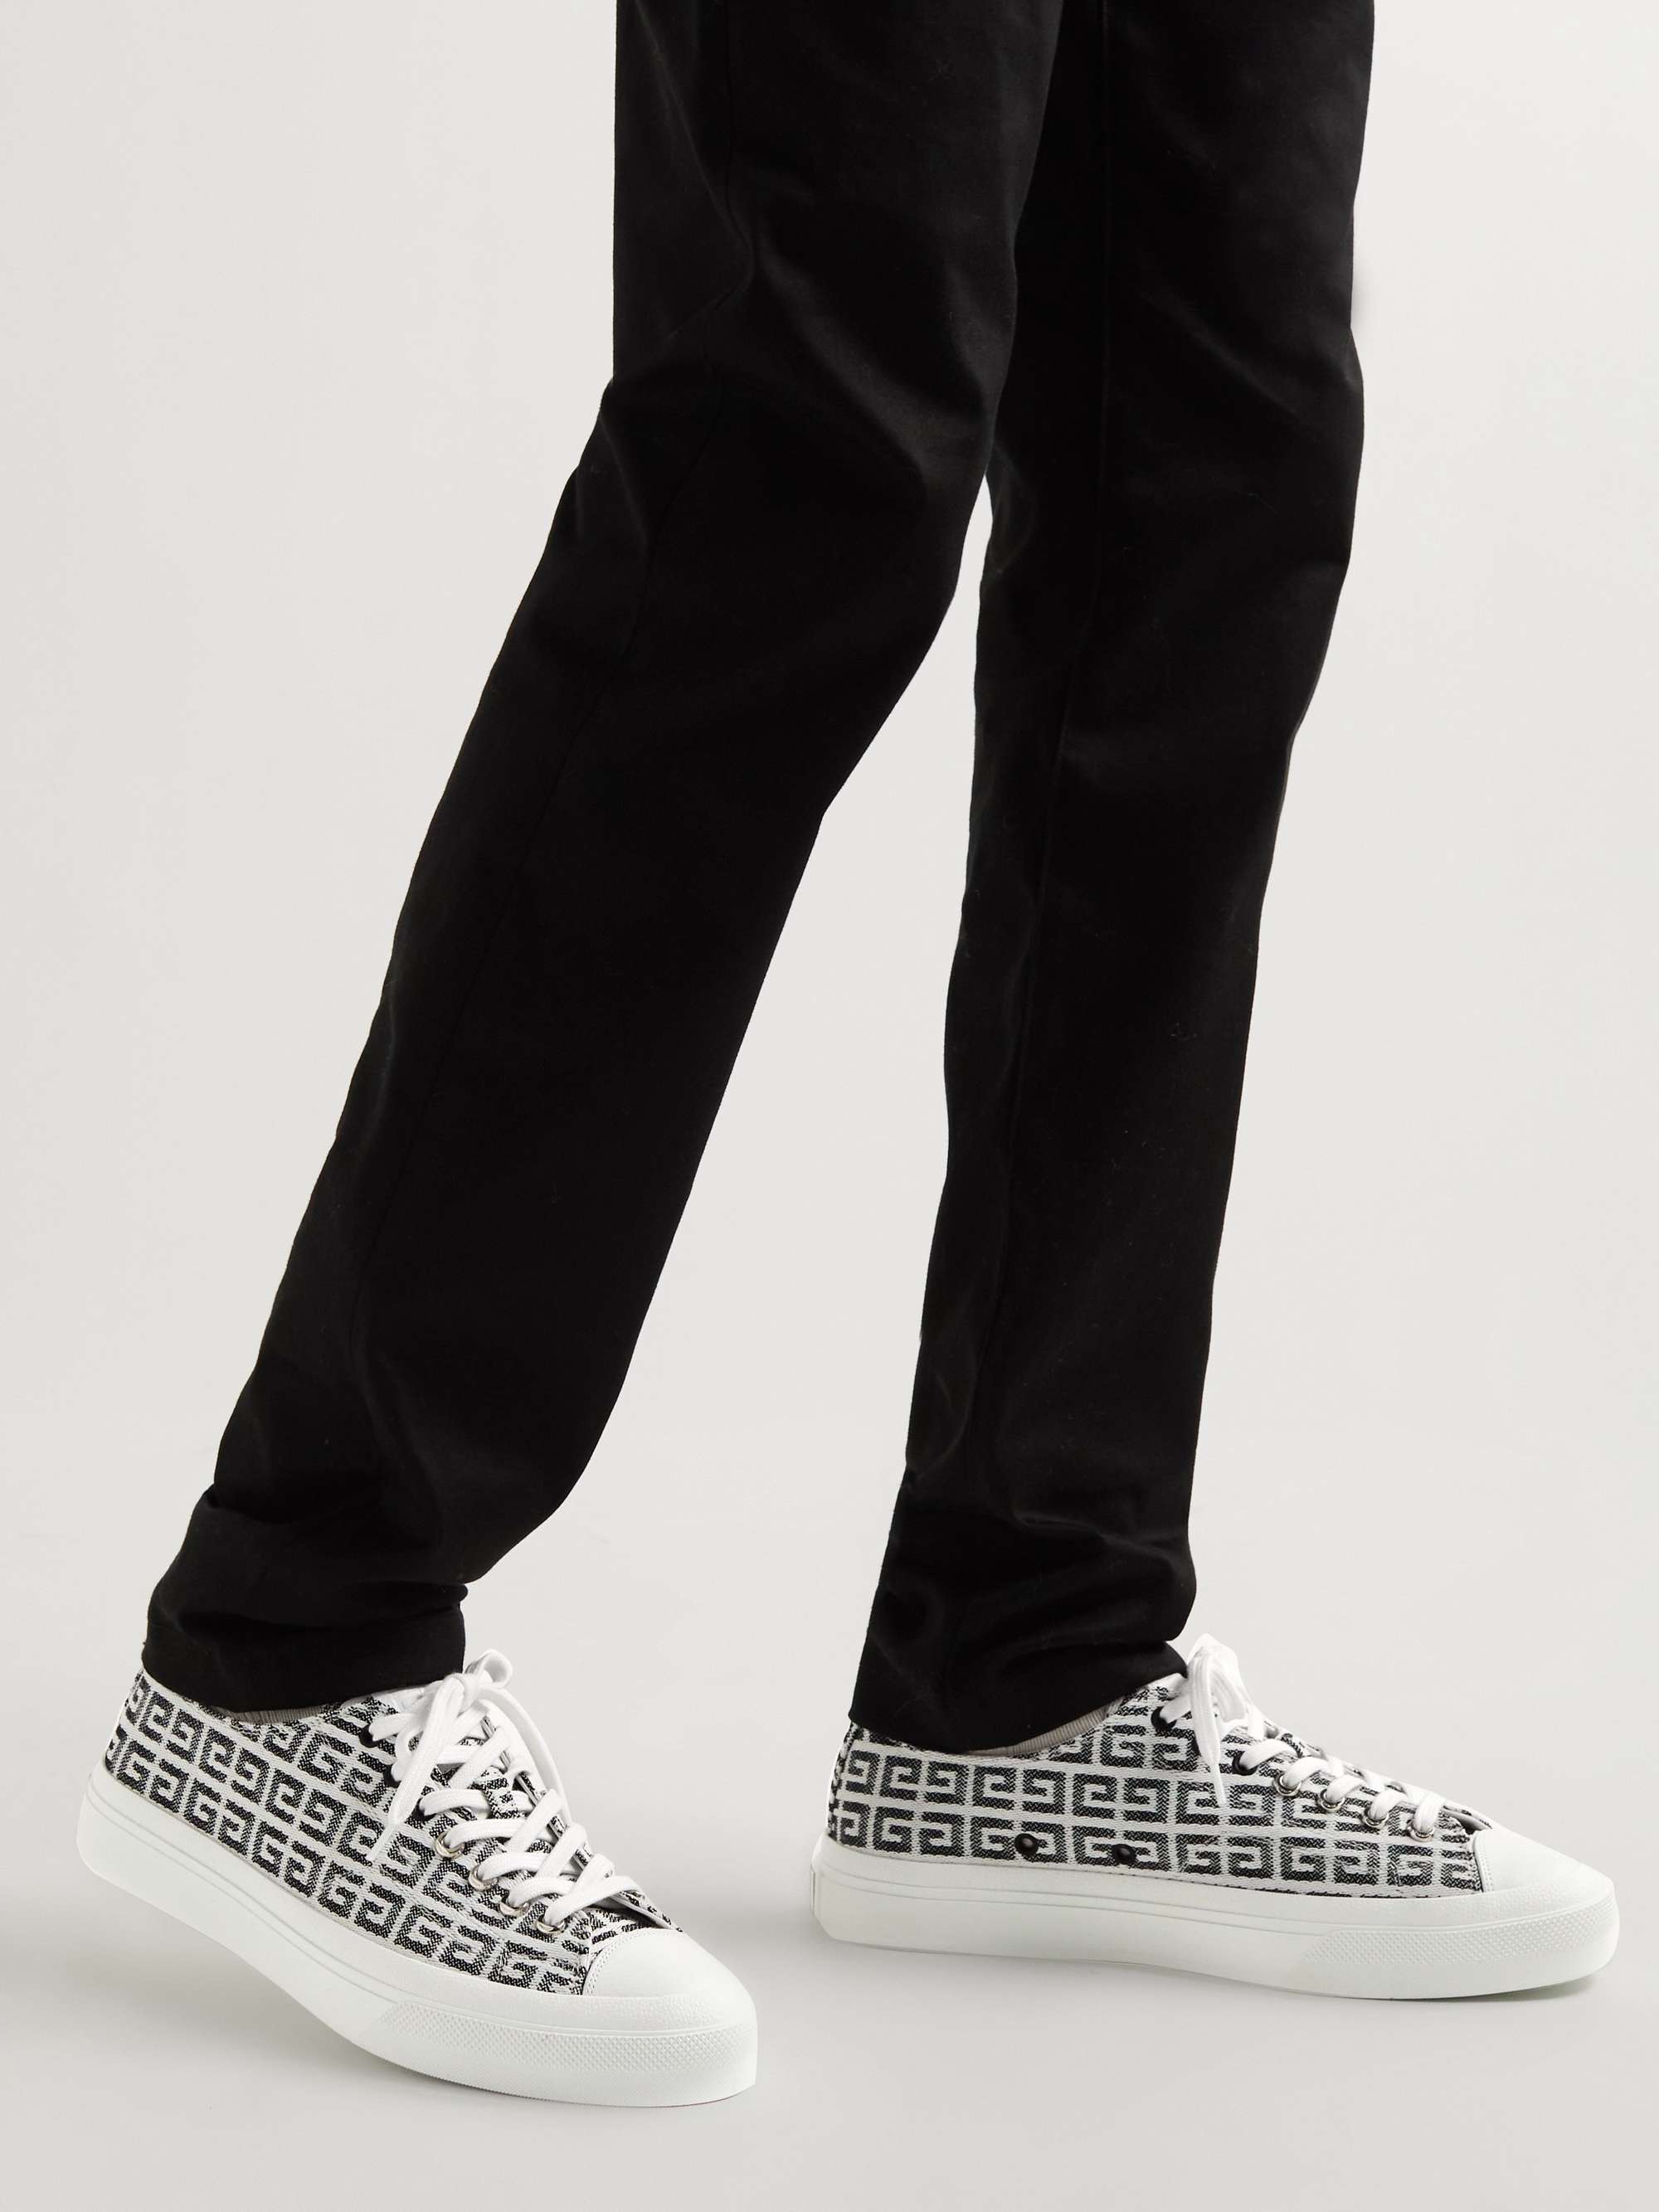 White City Leather-Trimmed Logo-Jacquard Canvas Sneakers | GIVENCHY | MR  PORTER